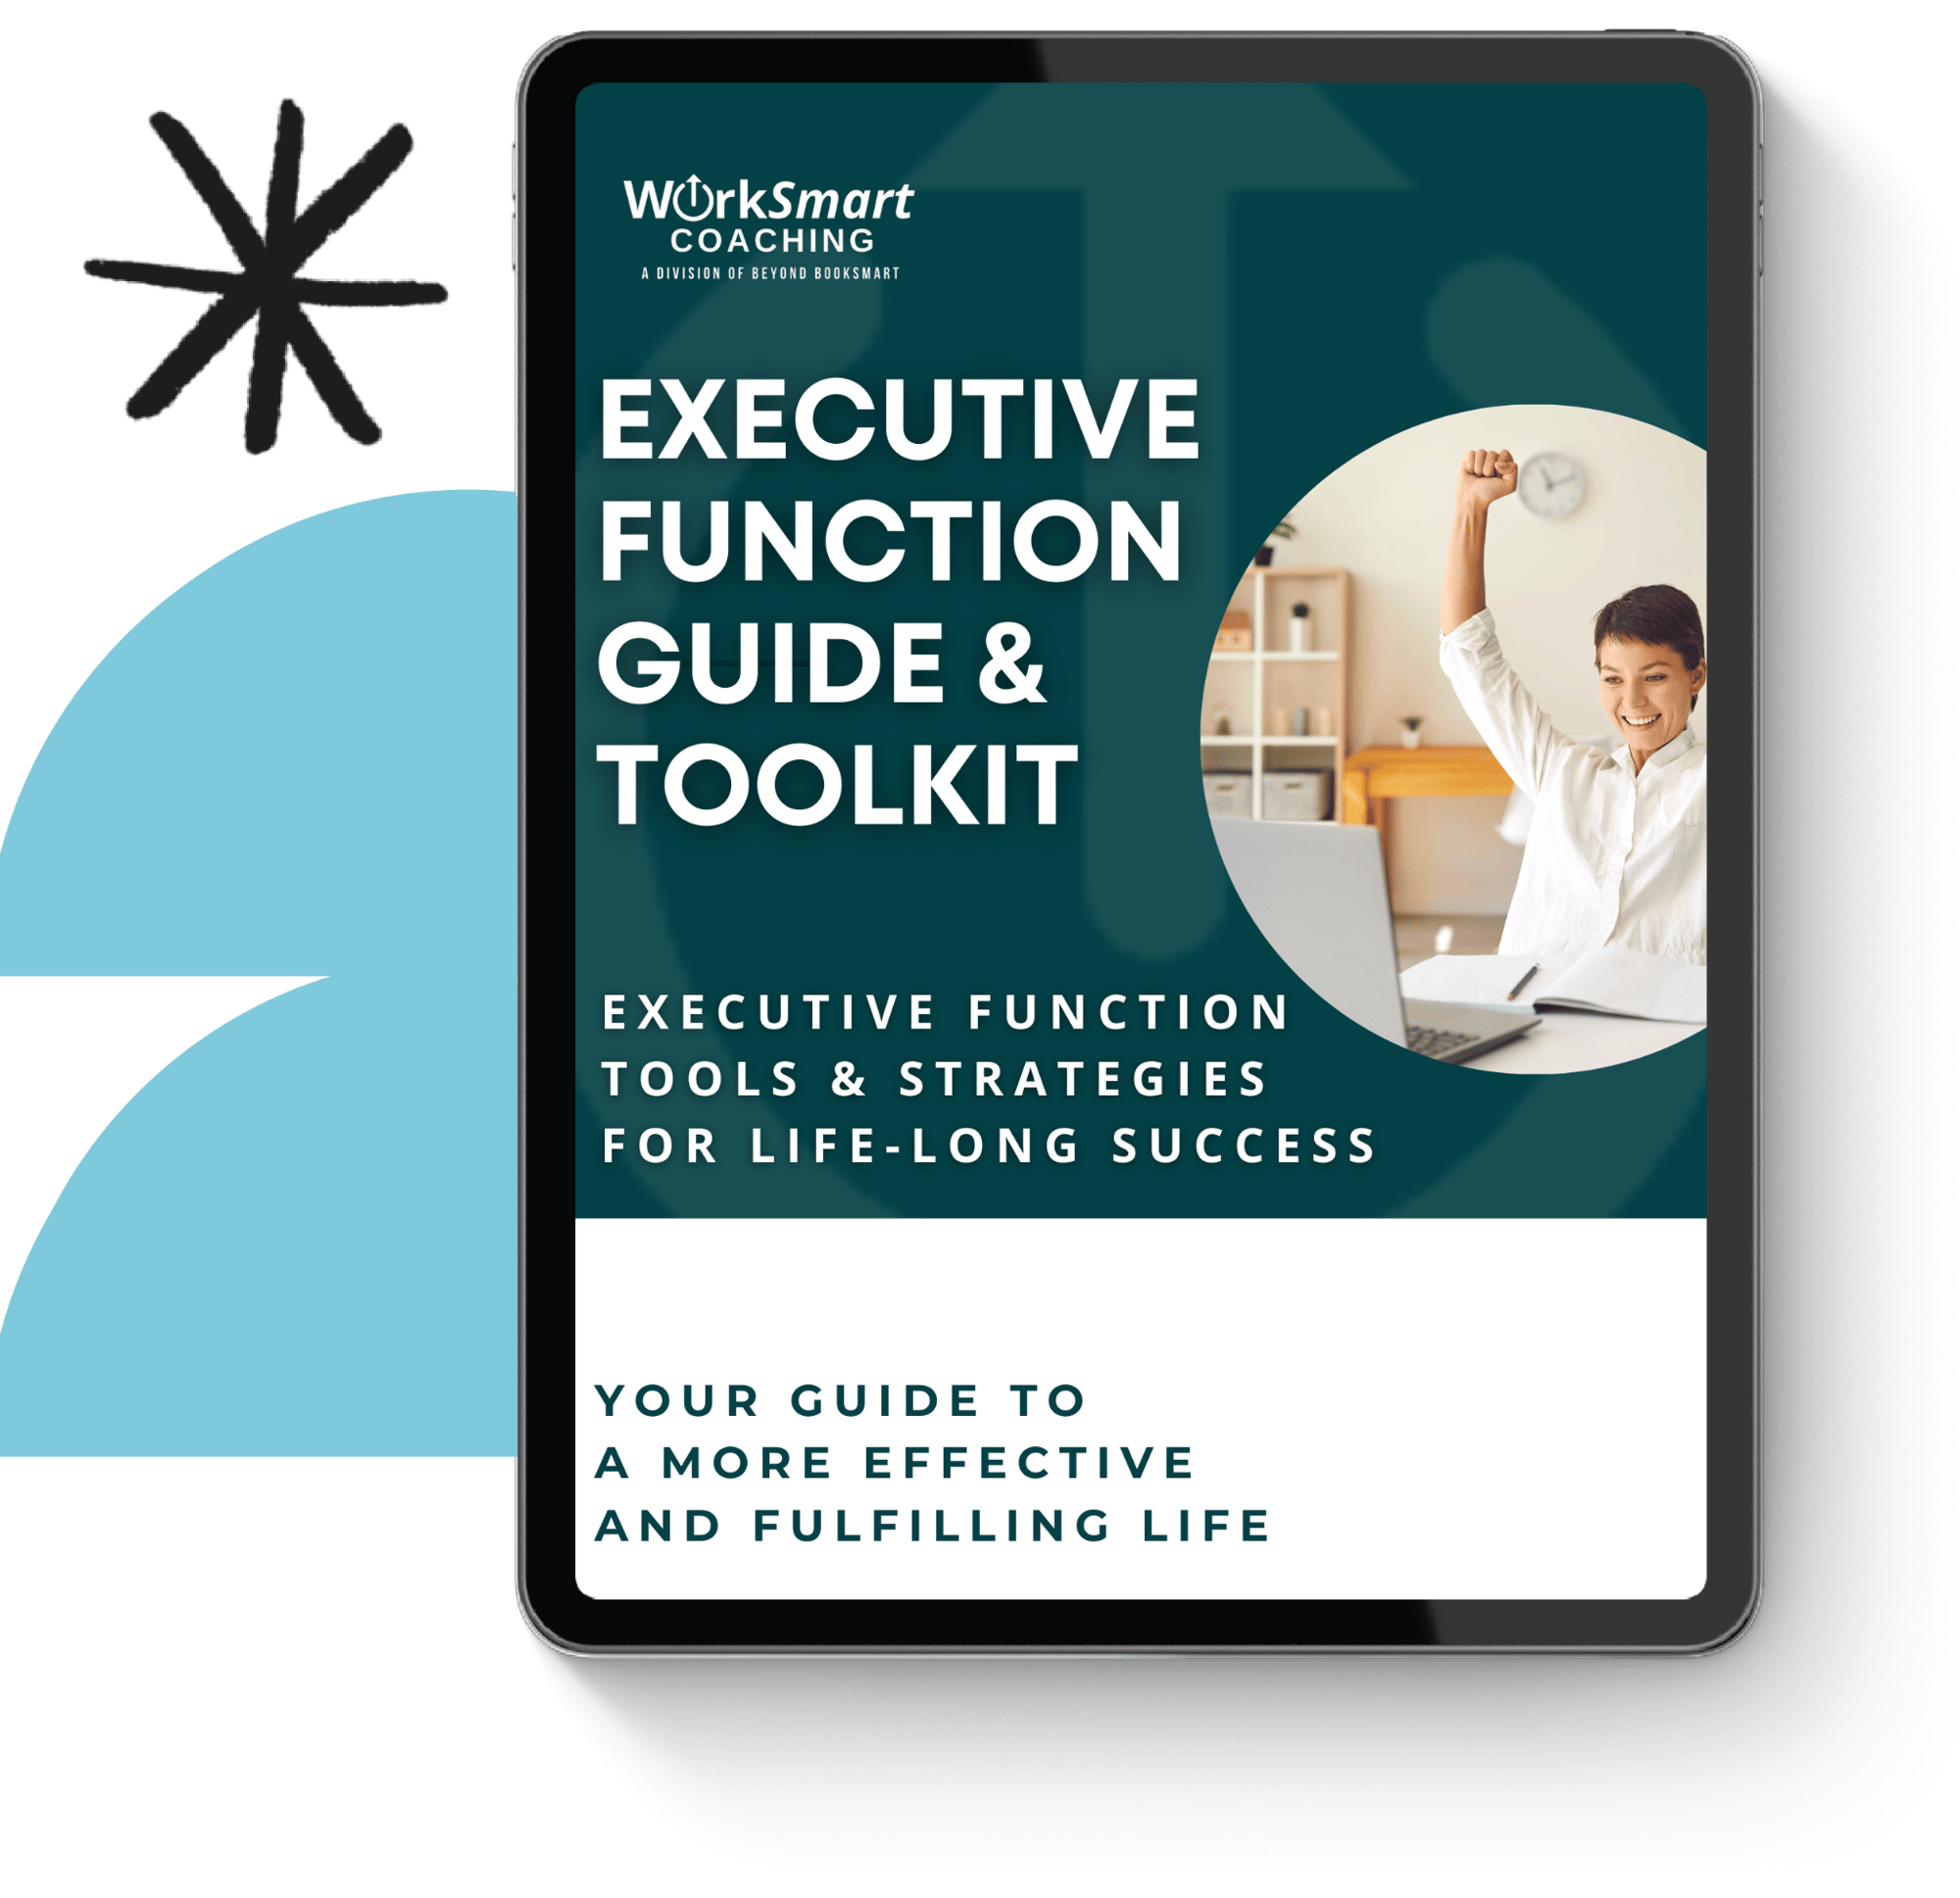 WorkSmart EF toolkit and guide